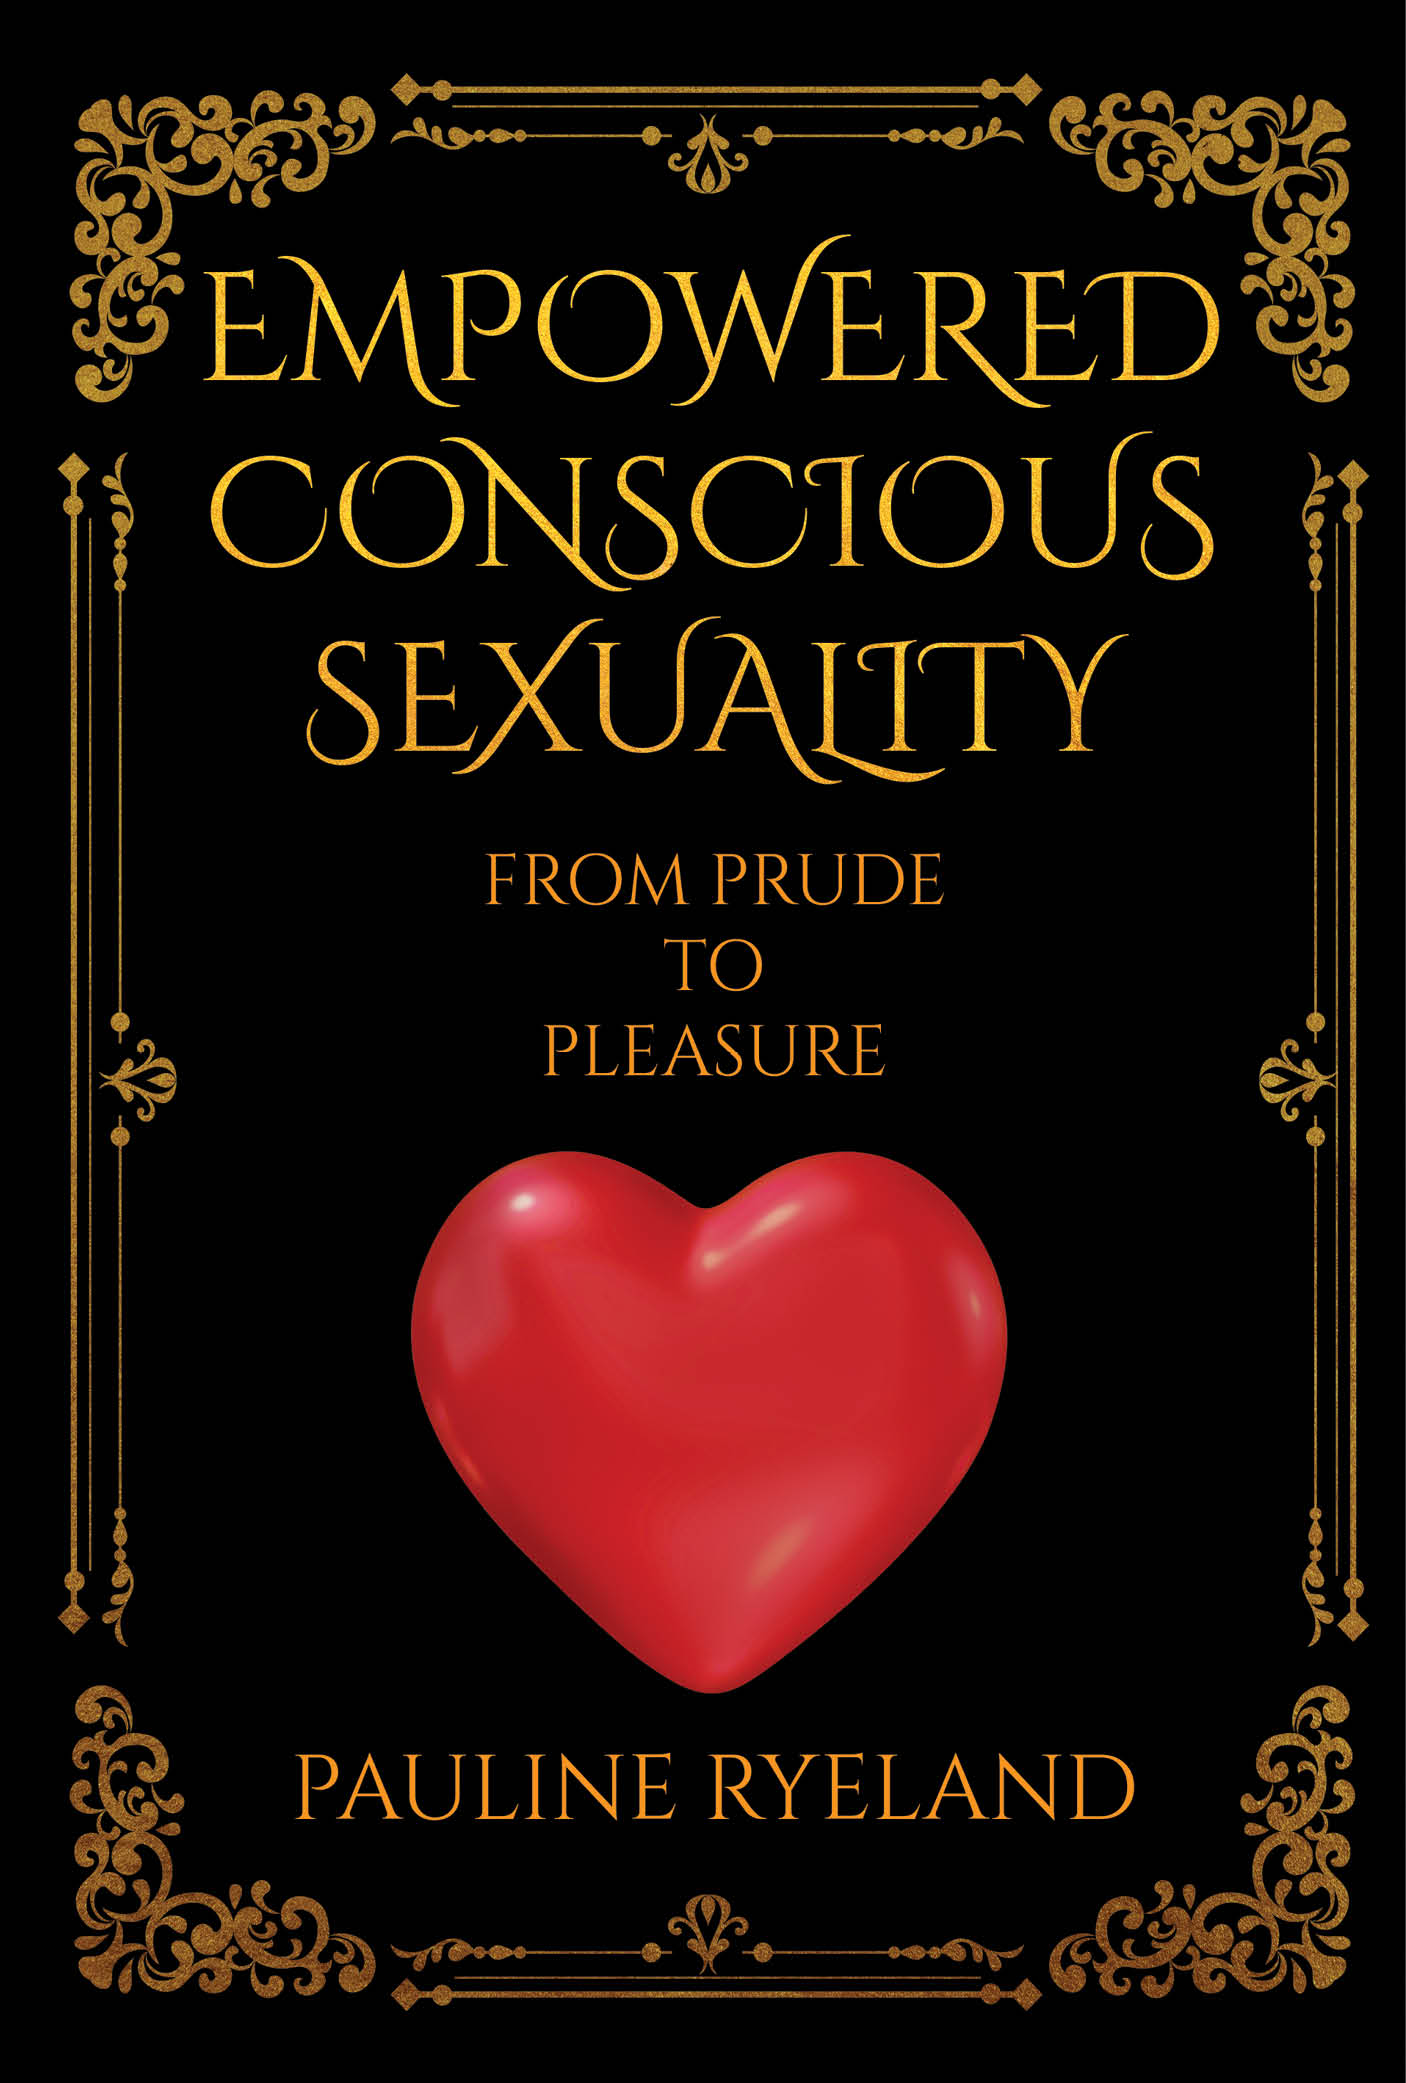 EMPOWERED CONSCIOUS SEXUALITY